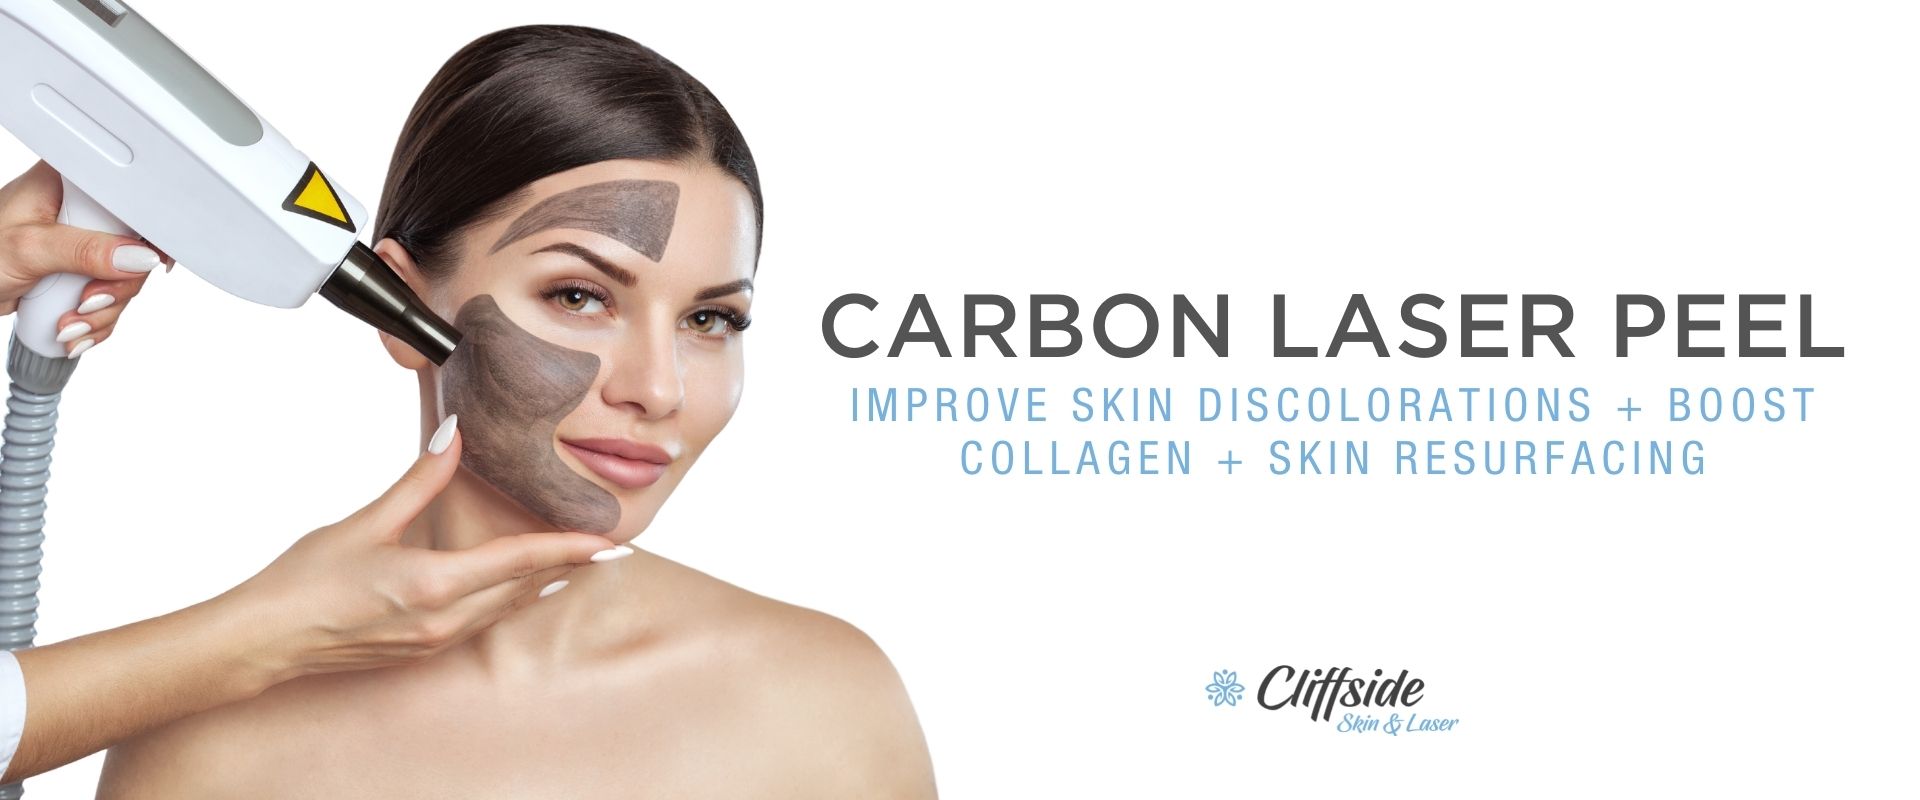 woman with beautiful face after Carbon laser peeling treatment